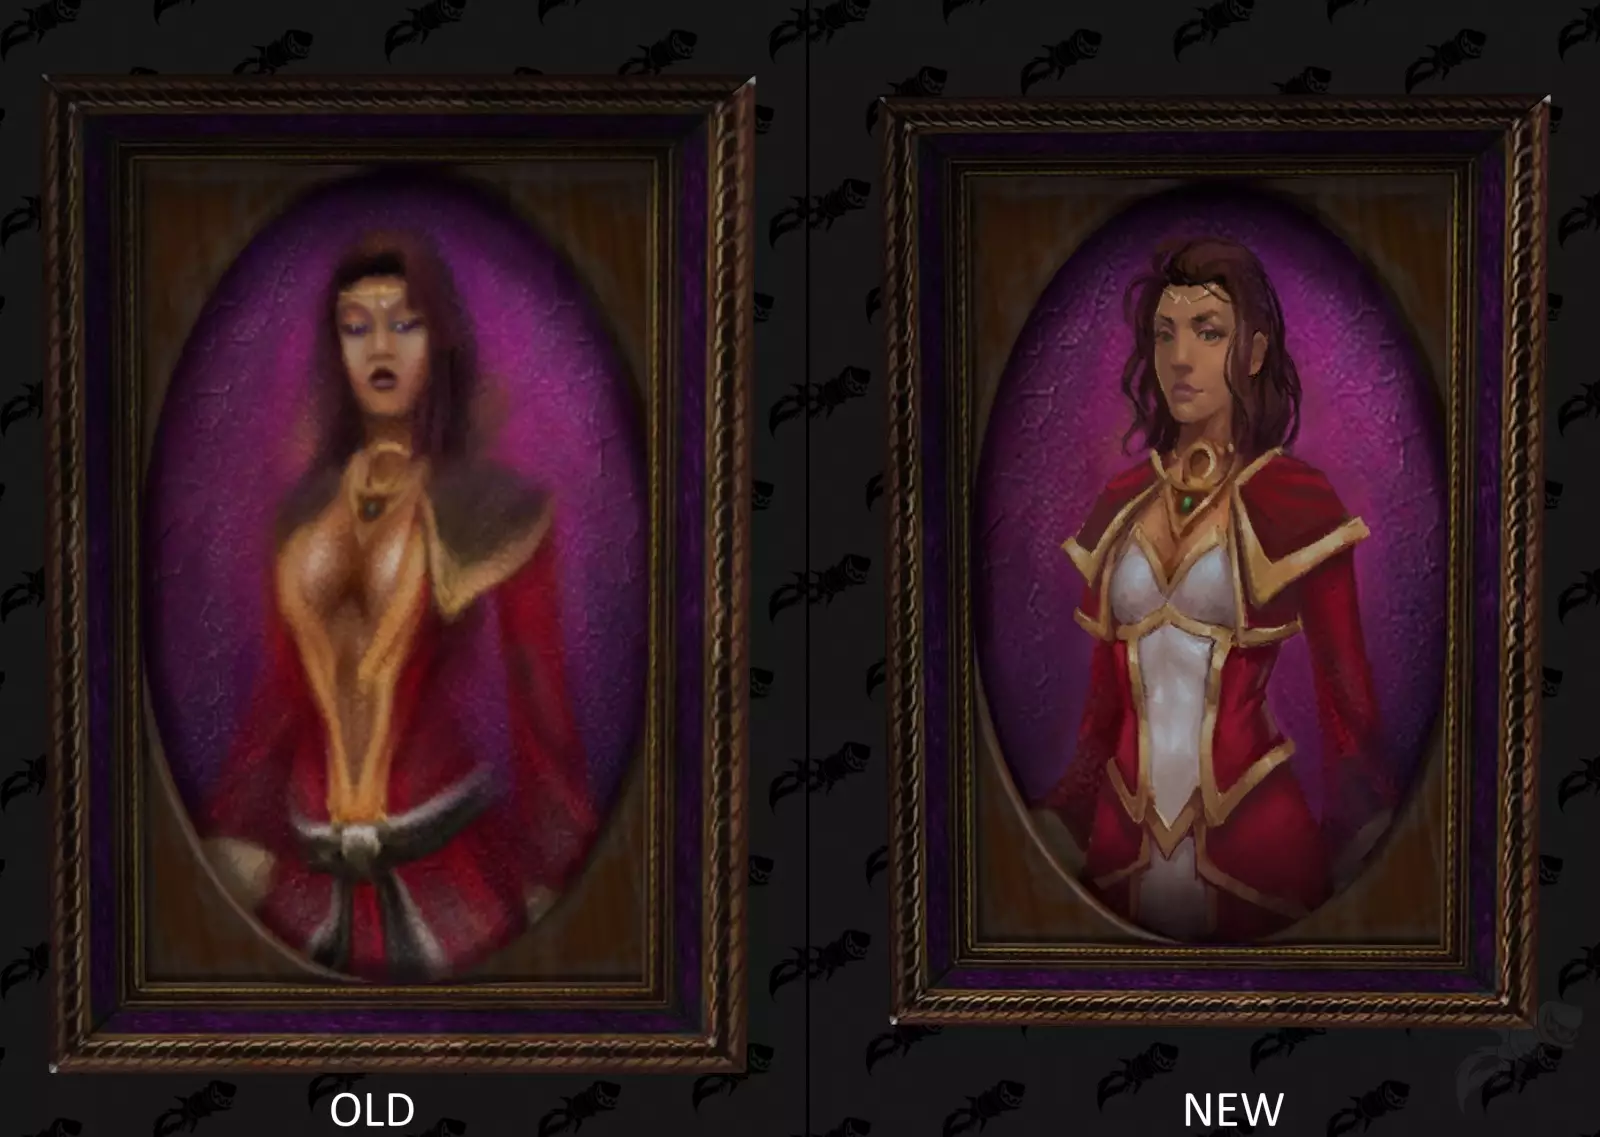 The old painting and the new painting in 'World of Warcraft' /